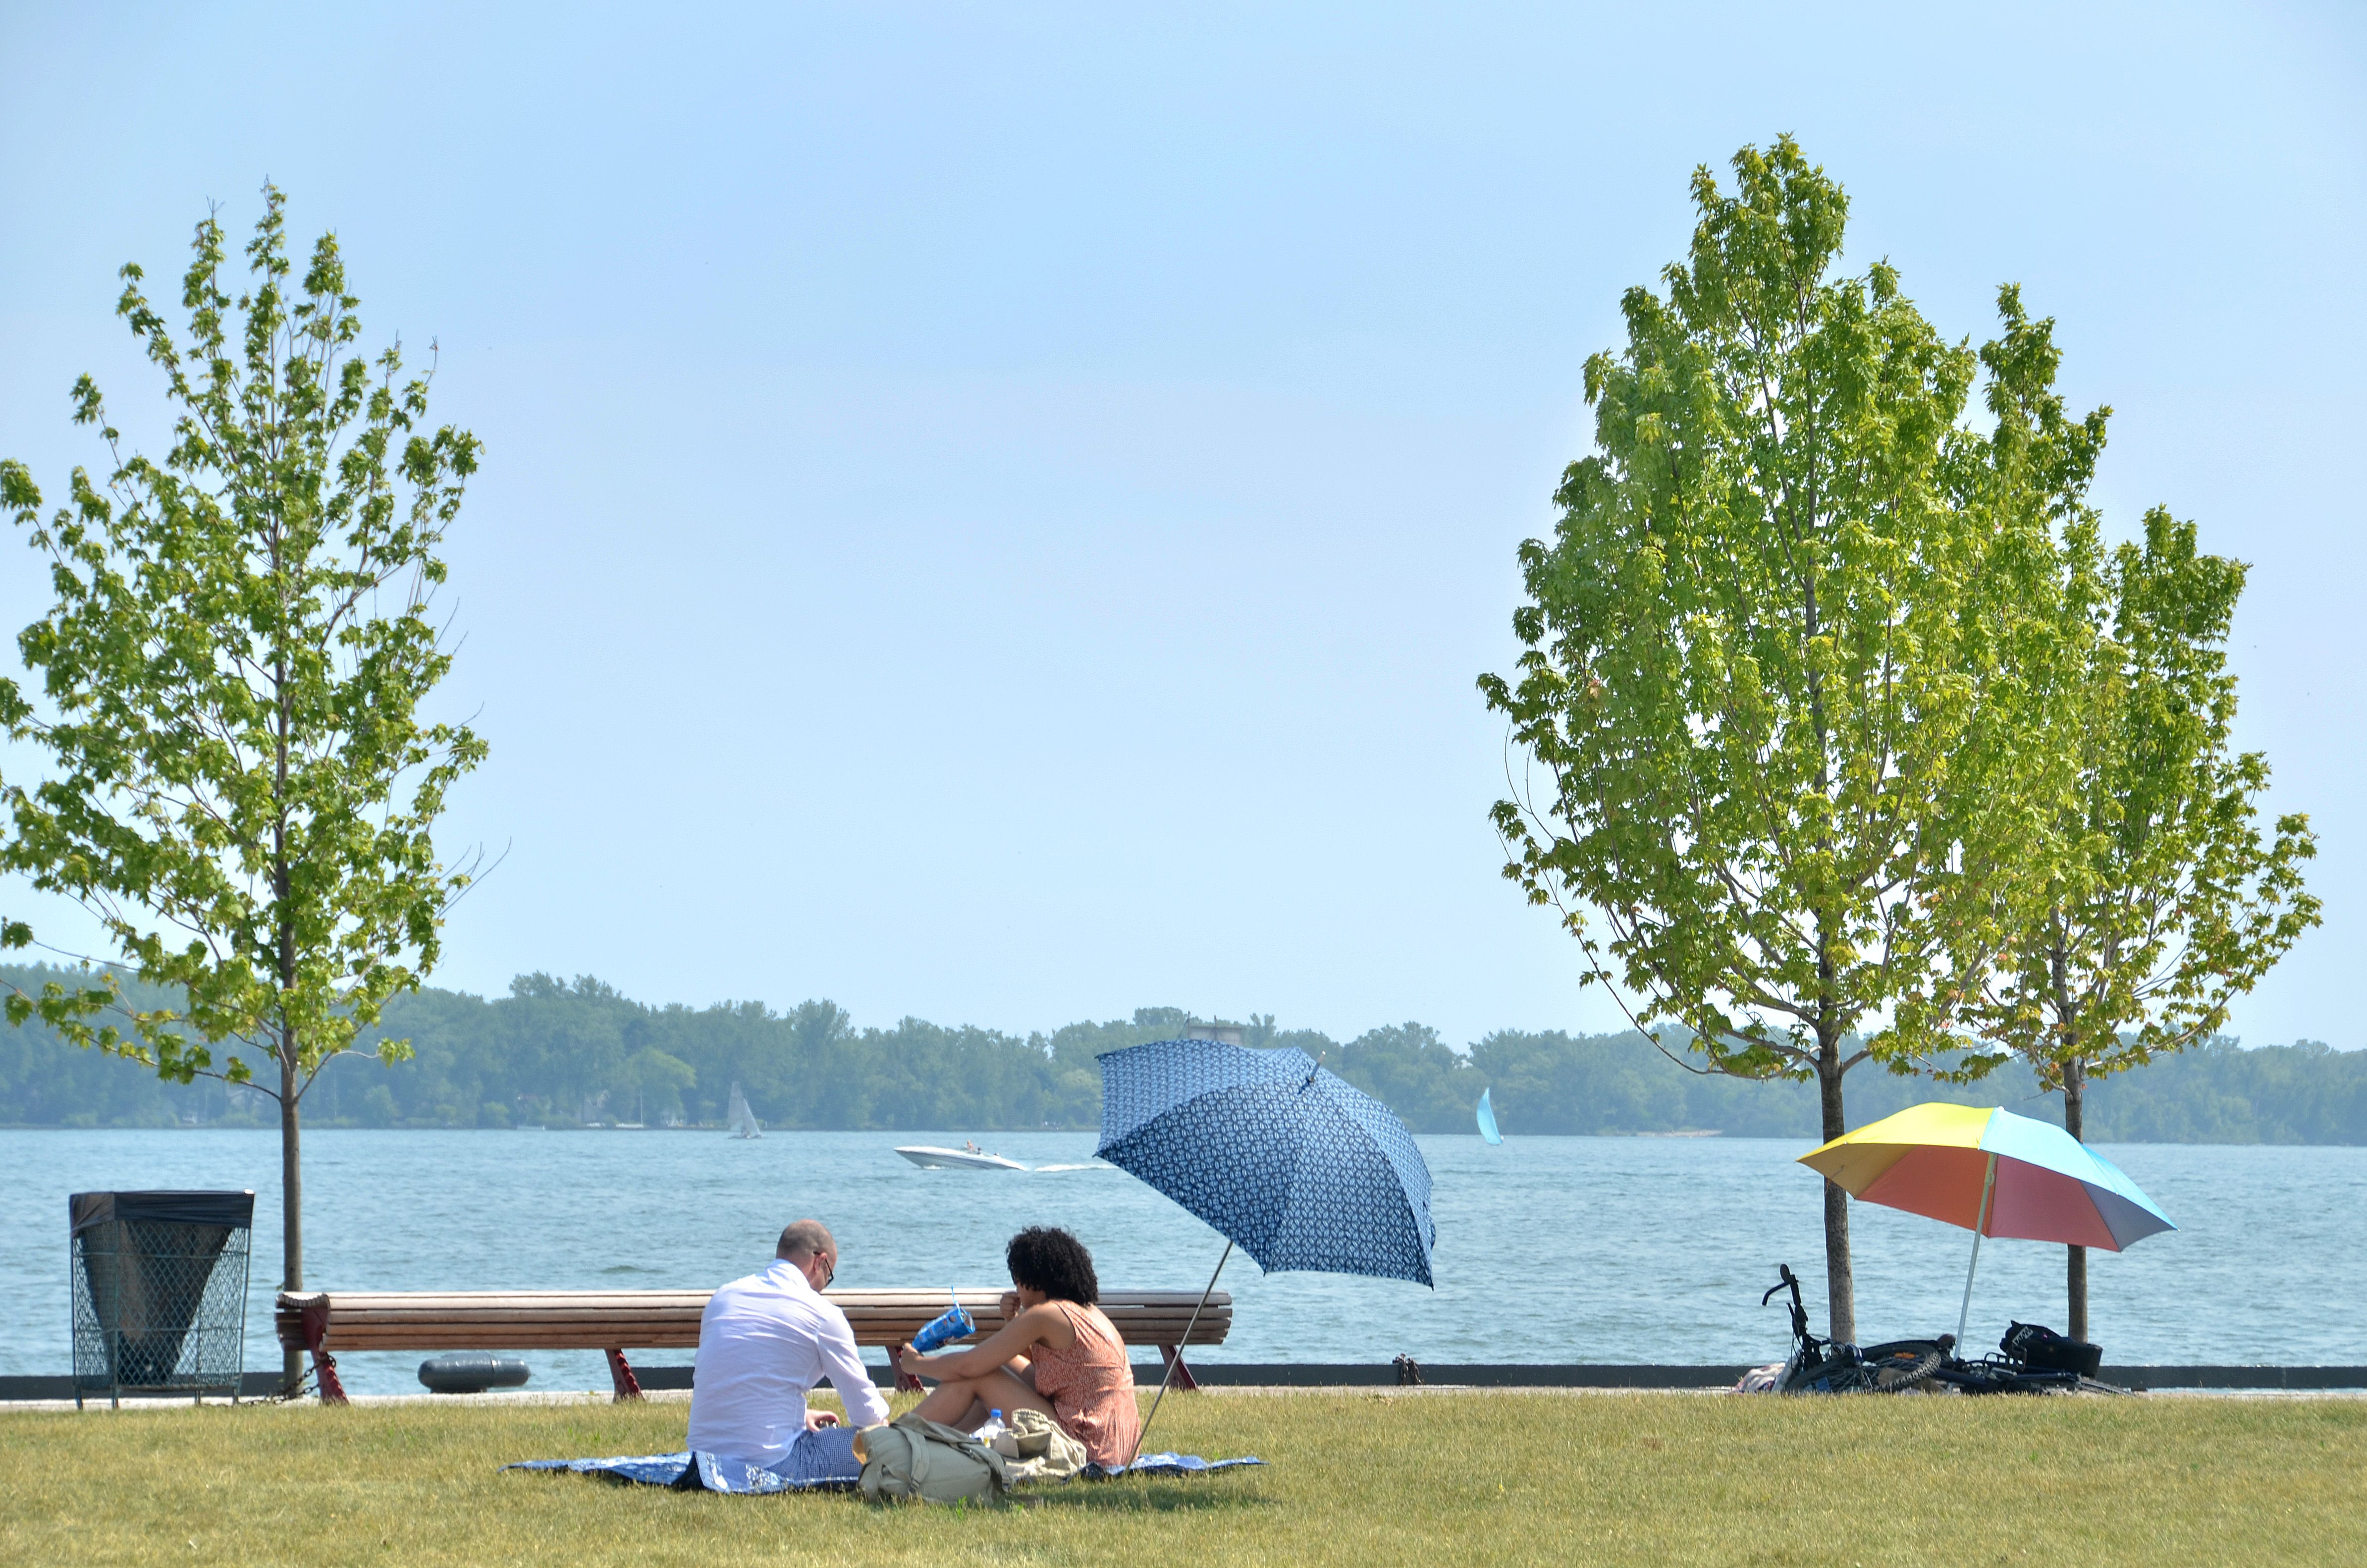 people sitting on the lawn next to Lake Ontario